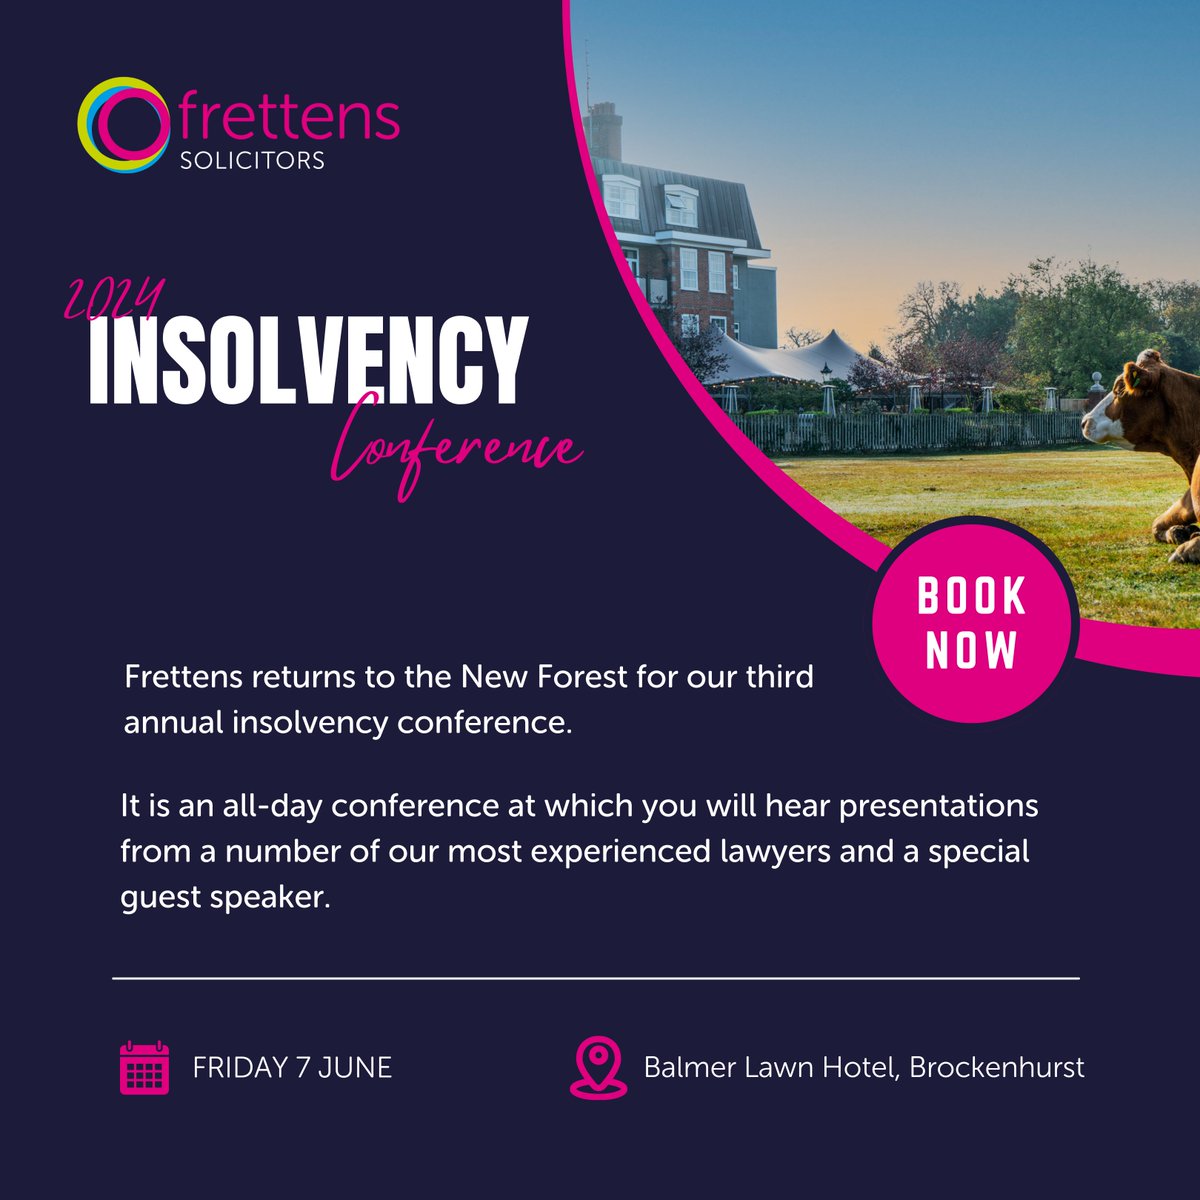 You can now secure your place at our annual Insolvency Conference on Friday 7th June at Balmer Lawn Hotel, Brockenhurst 😁 Malcolm Niekirk and the team will be briefing you on Companies House changes, trading businesses and so much more 🗣 Book here 👉 zurl.co/rjcf